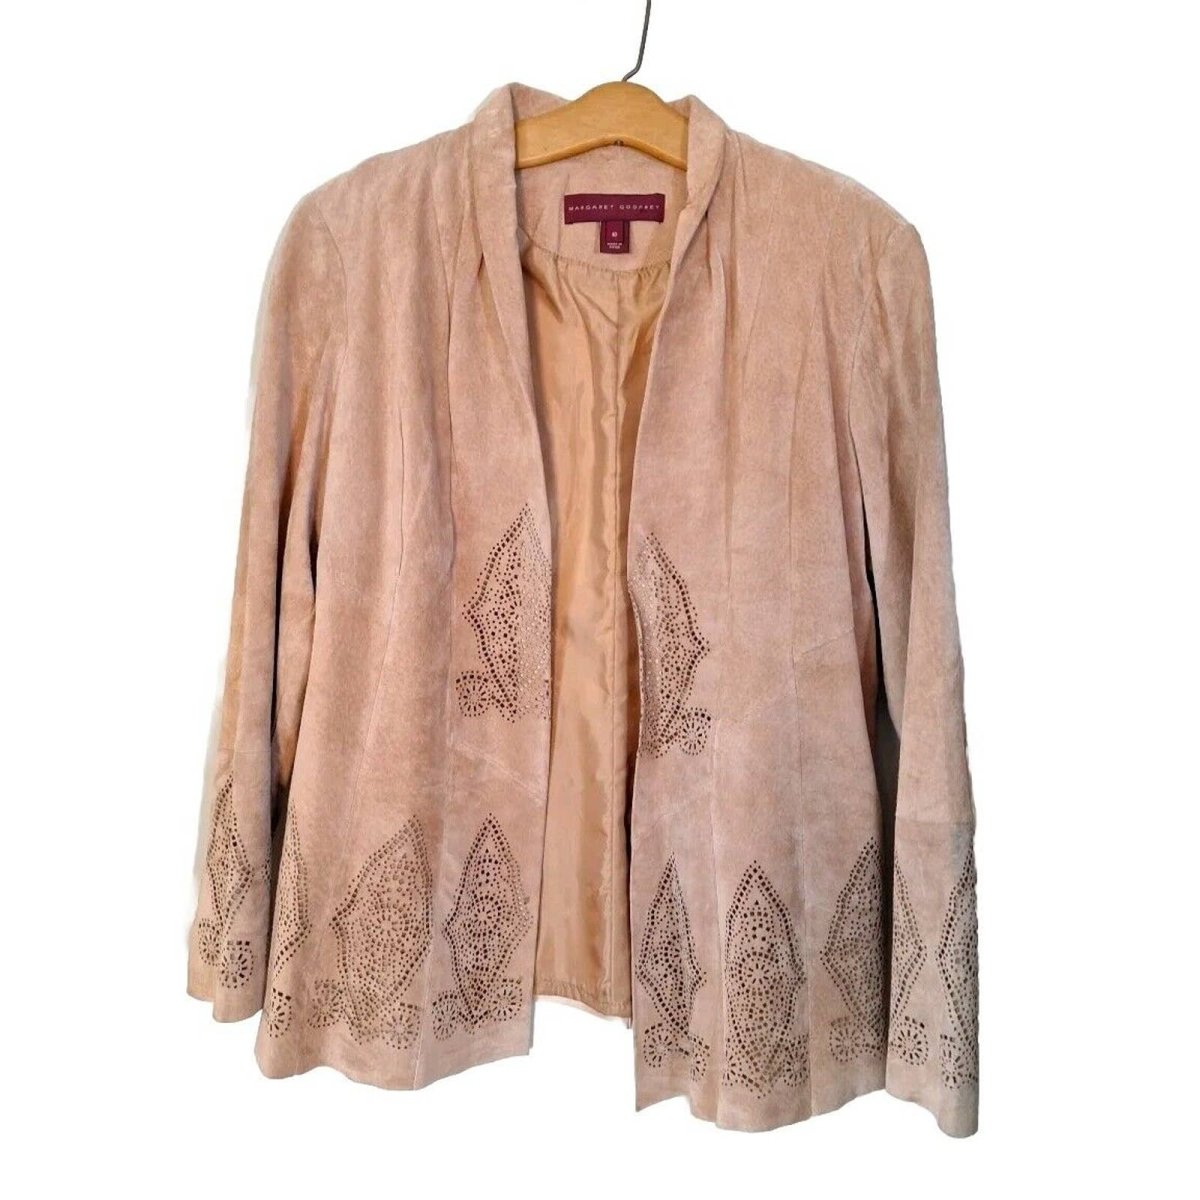 Y2K Tan Suede Boho Bell Sleeve Jacket Women Size 10 - themallvintage The Mall Vintage